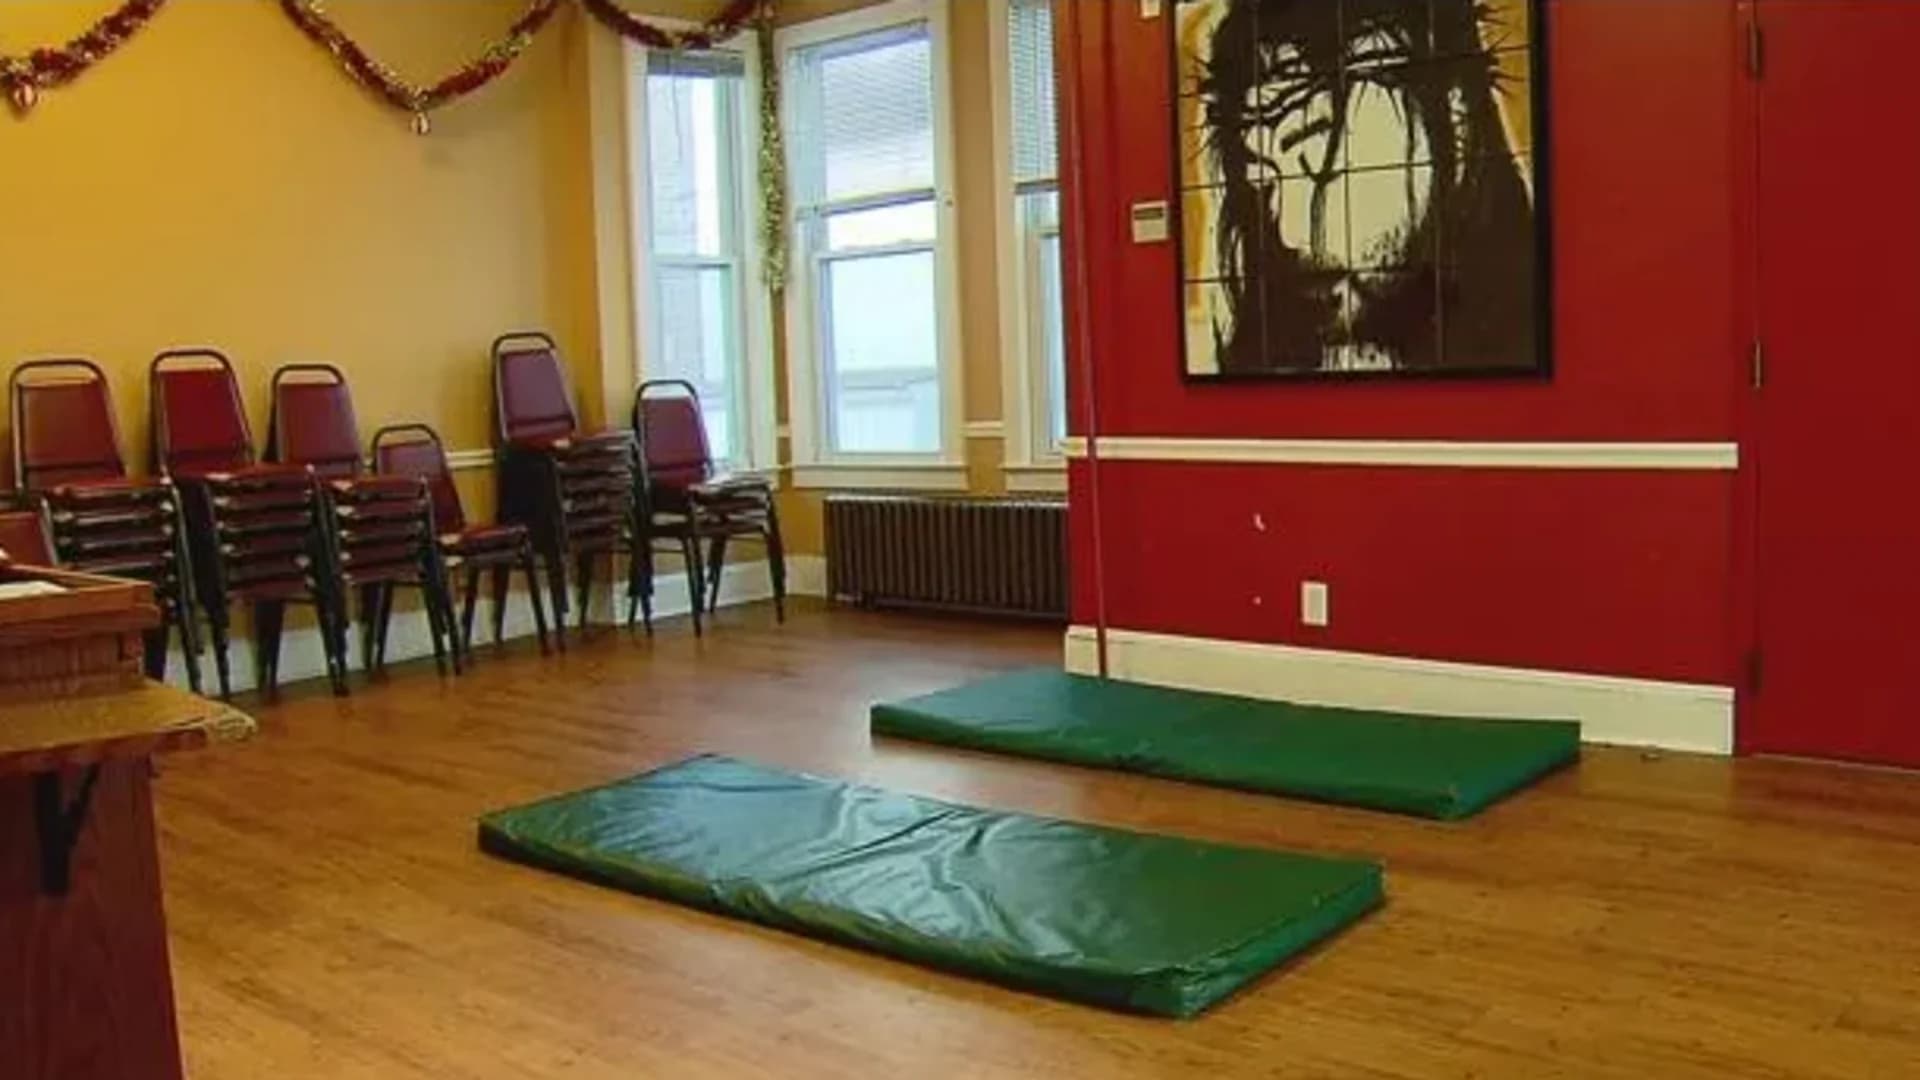 Bridgeport rescue mission offers additional space during frigid cold